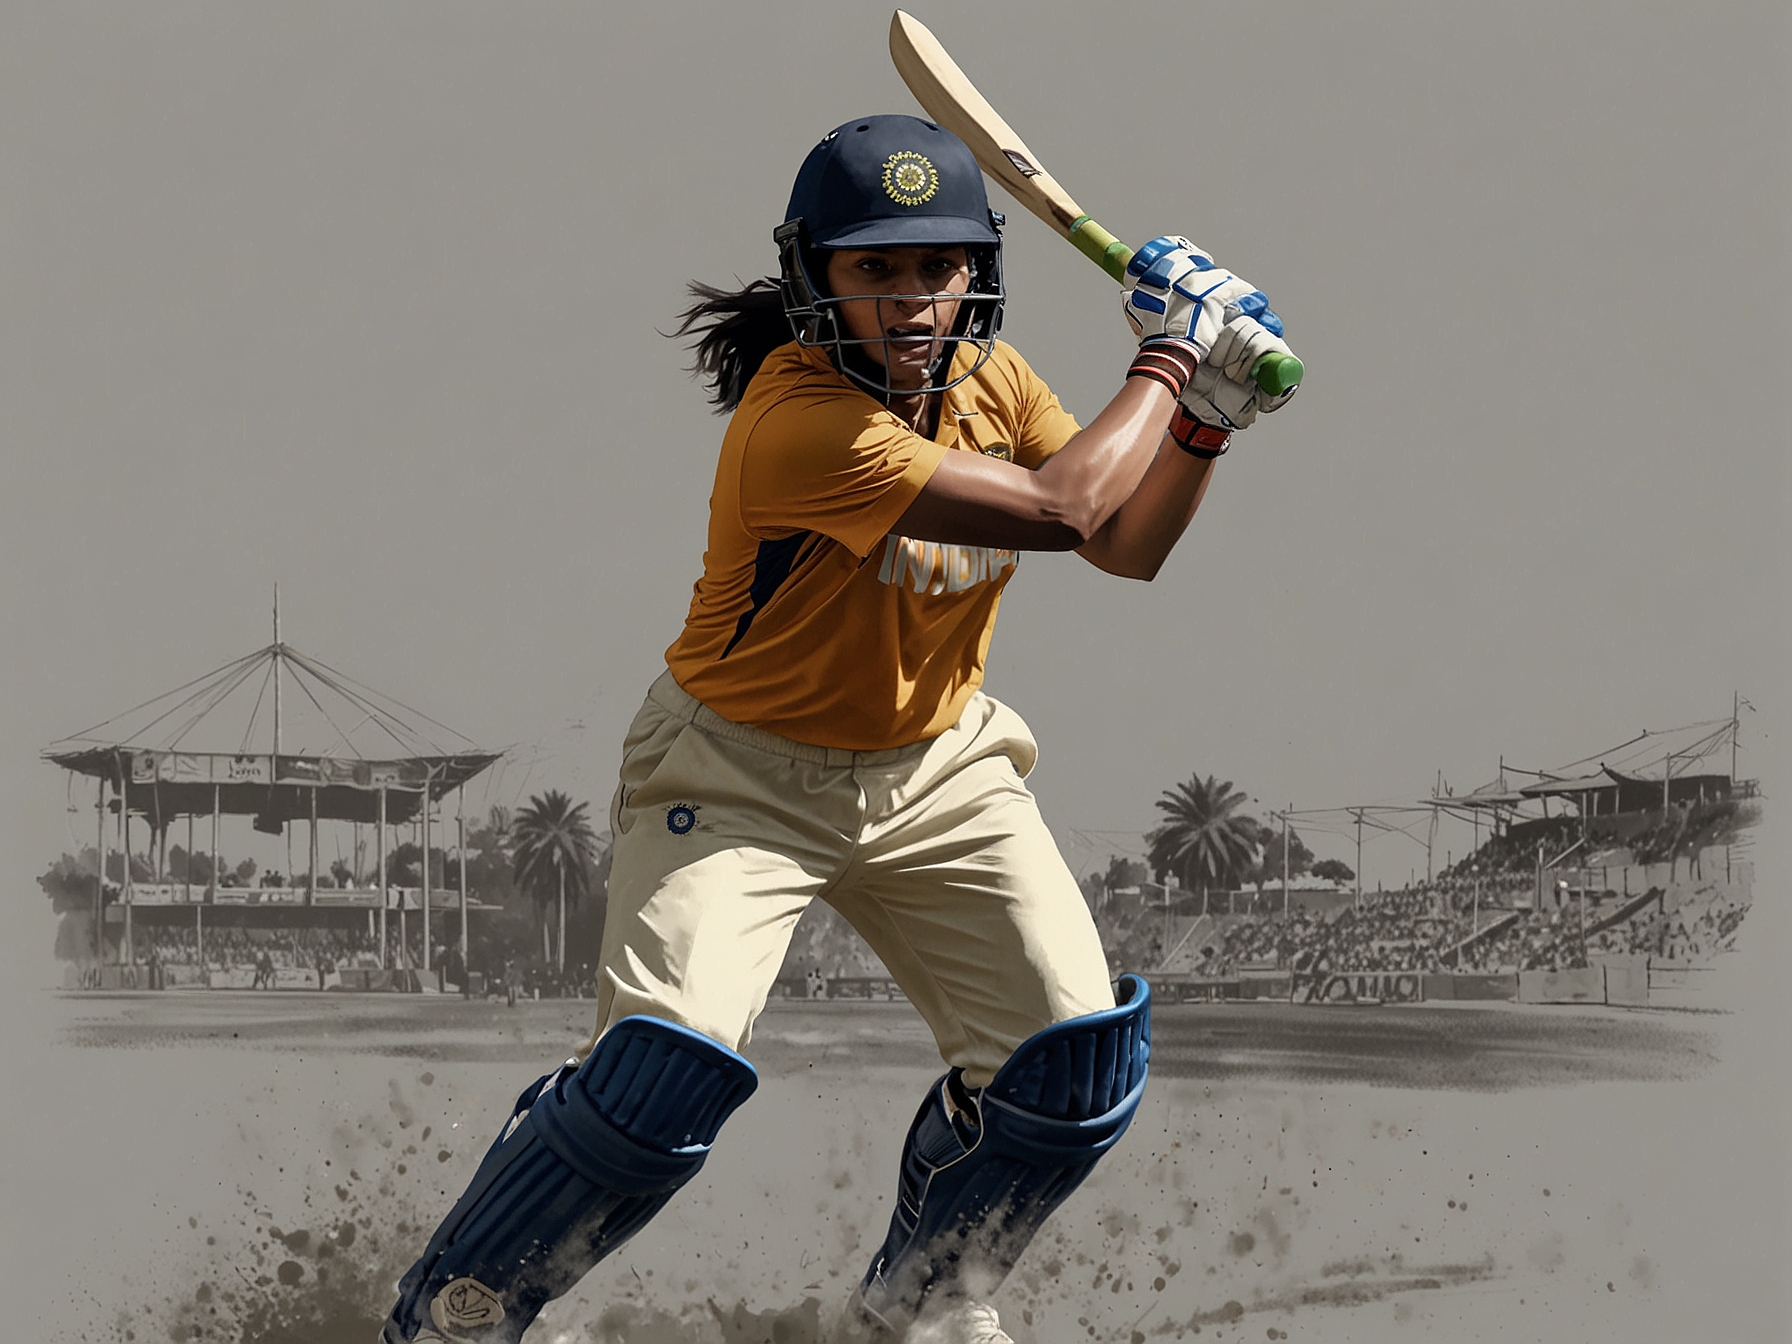 India Women's star opener plays a majestic shot, showcasing her aggressive and technically sound batting that helped set a competitive total against South Africa Women.